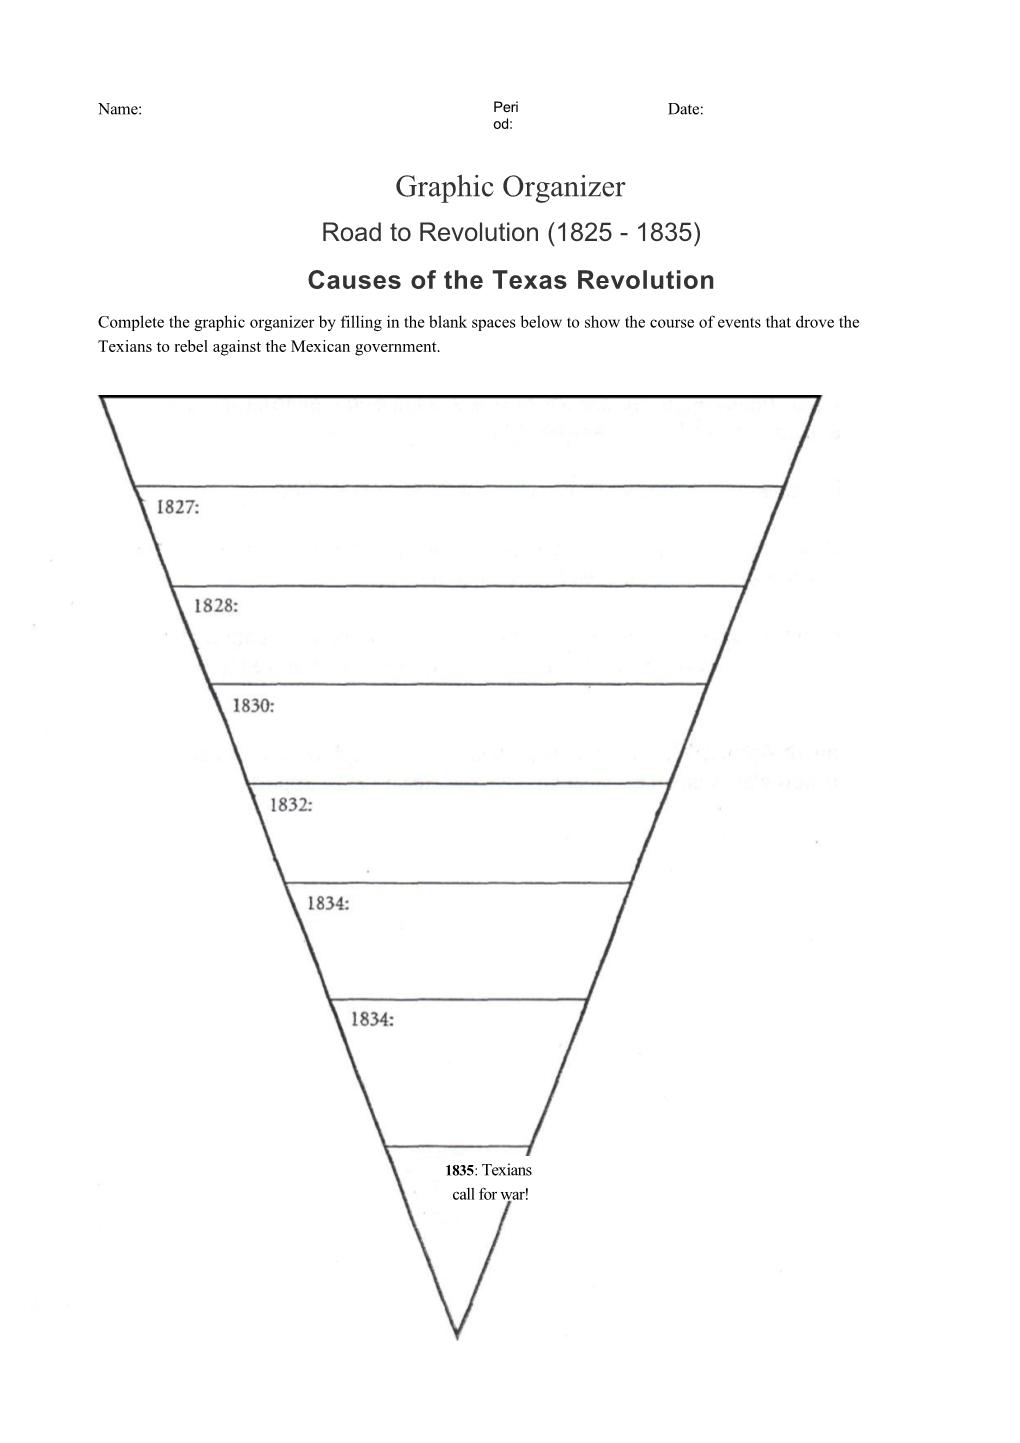 Causes of the Texas Revolution